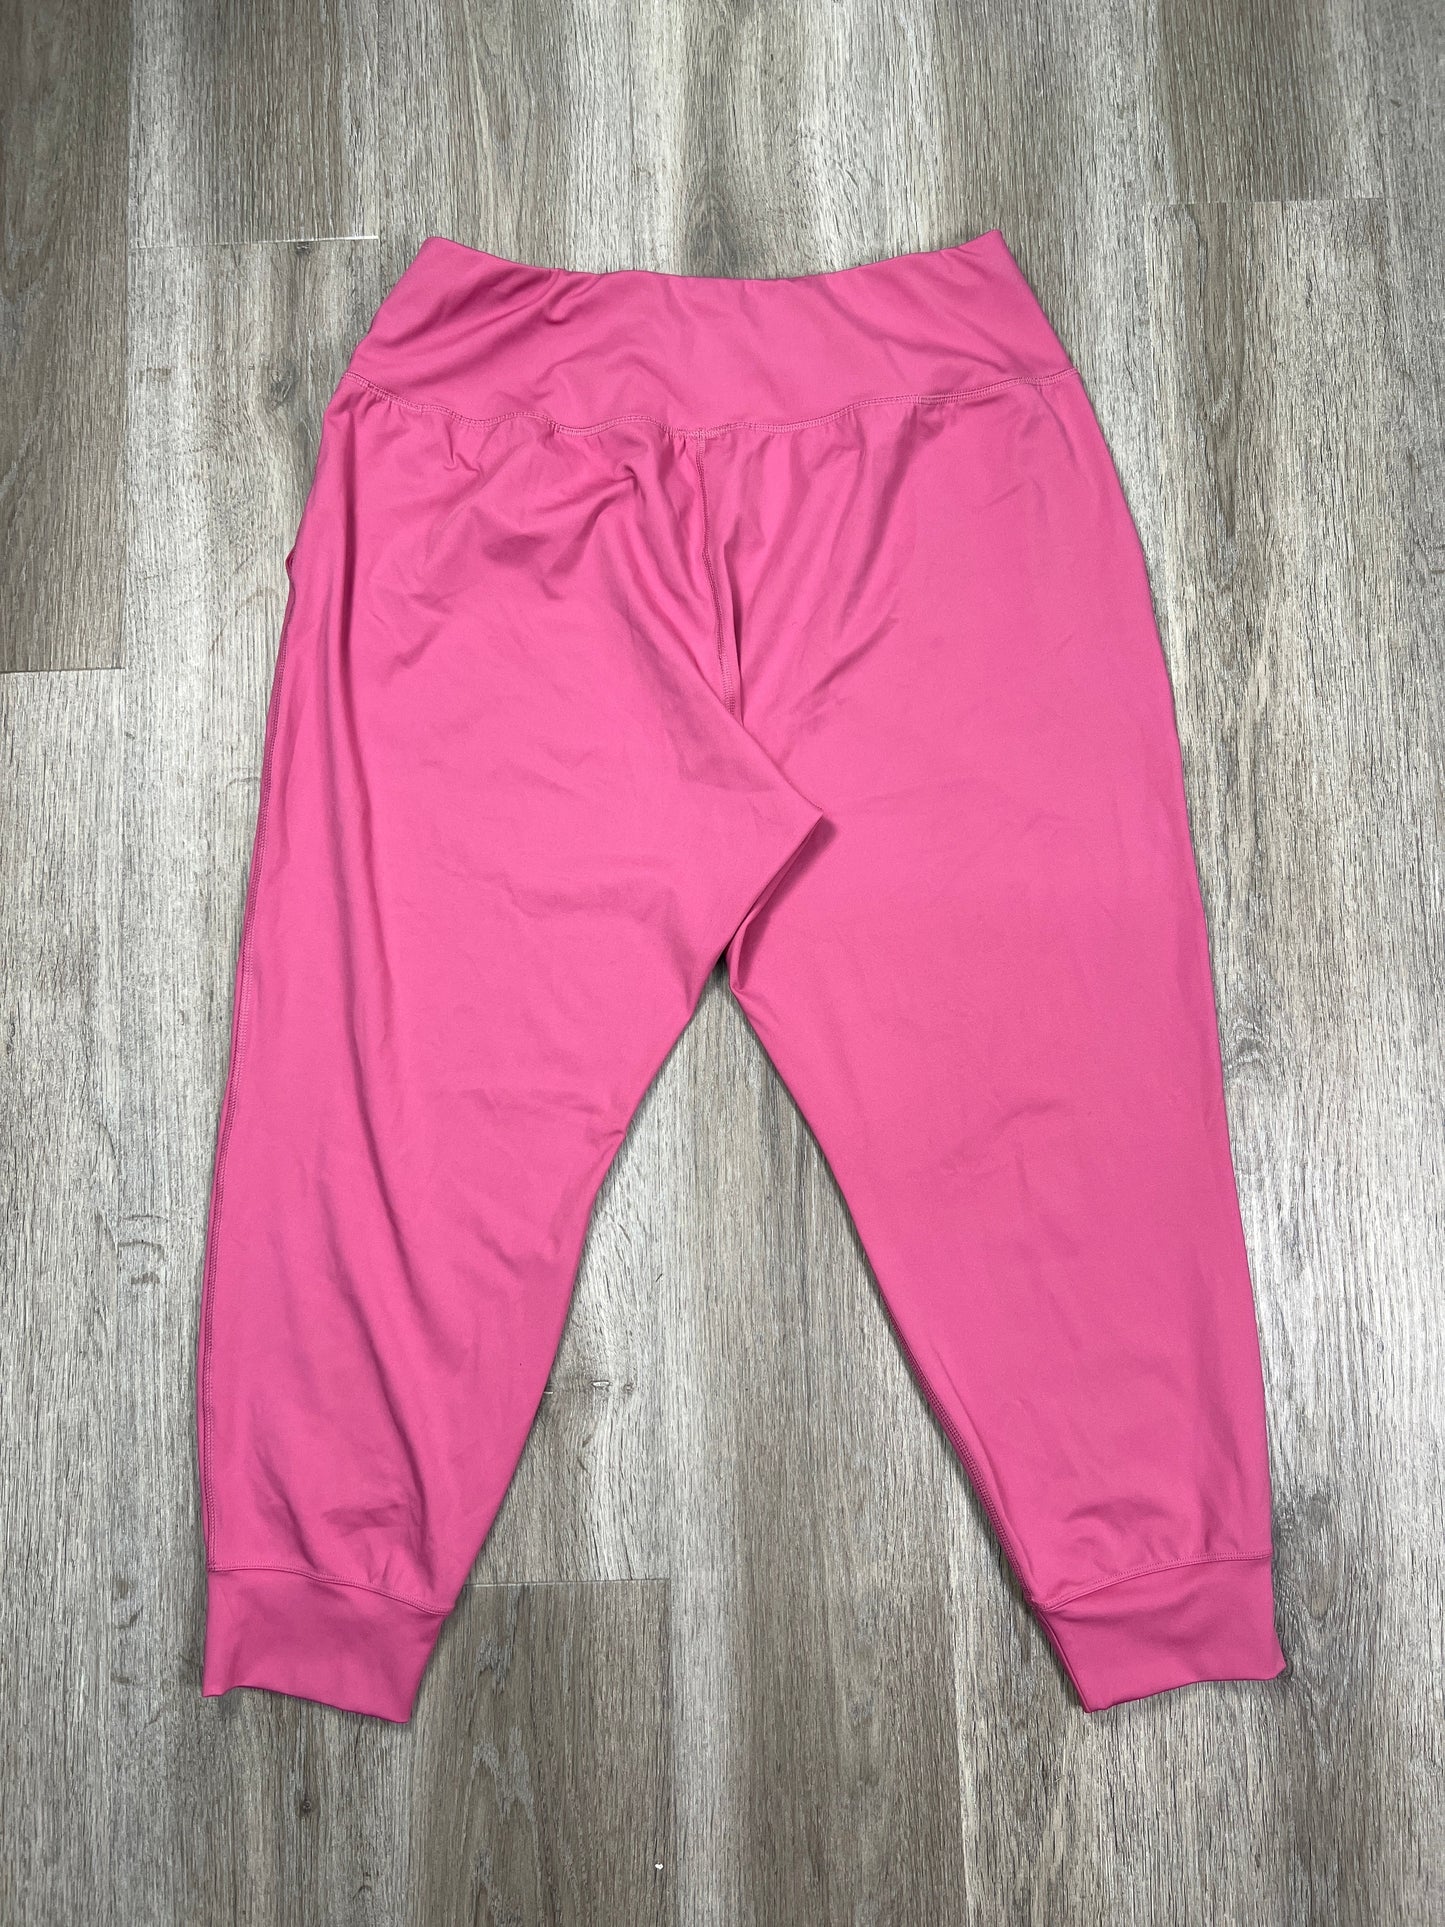 Pink Athletic Pants Under Armour, Size 2x